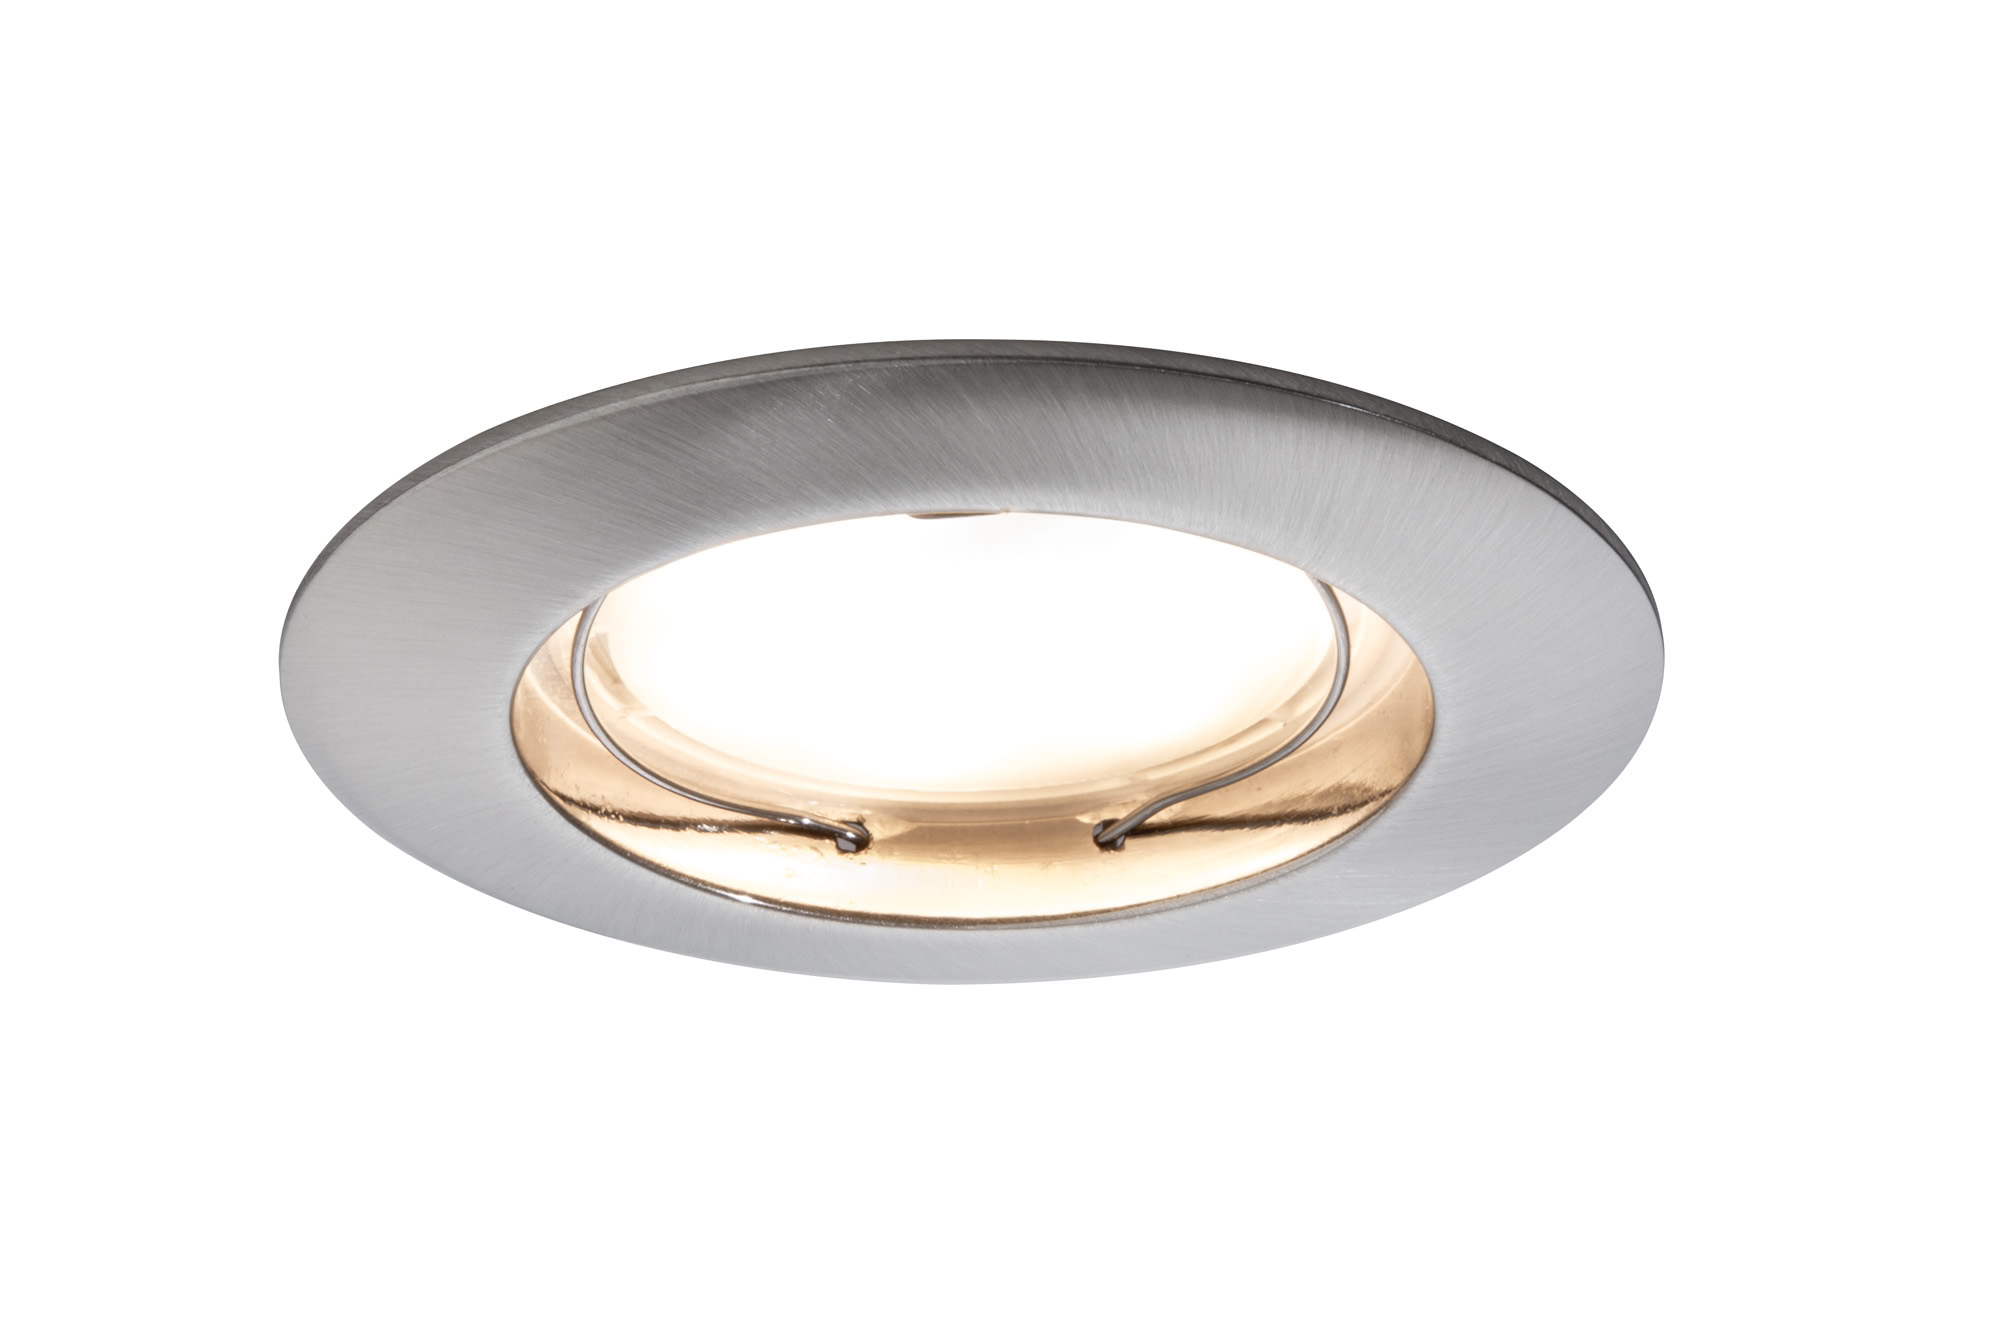 92722 Premium EBL Set Coin starr LED Eisen g. The Coins are innovative and user-friendly recessed spotlights that are suitable for new installations as well as replacing existing installations. Since they are exceptionally flat, they can be installed in ceilings with a cavity of only 30 to 35В millimetres. From 50В centimetres to 5В metres or more вЂ“ you determine the spacing between the lights! The simple and tool-free linking of single luminaires using quick clips save more than just time and stress вЂ“ thanks to energy-efficient LED technology with very lower power consumption, the Coins are also easy on the wallet. 927.22 Paulmann